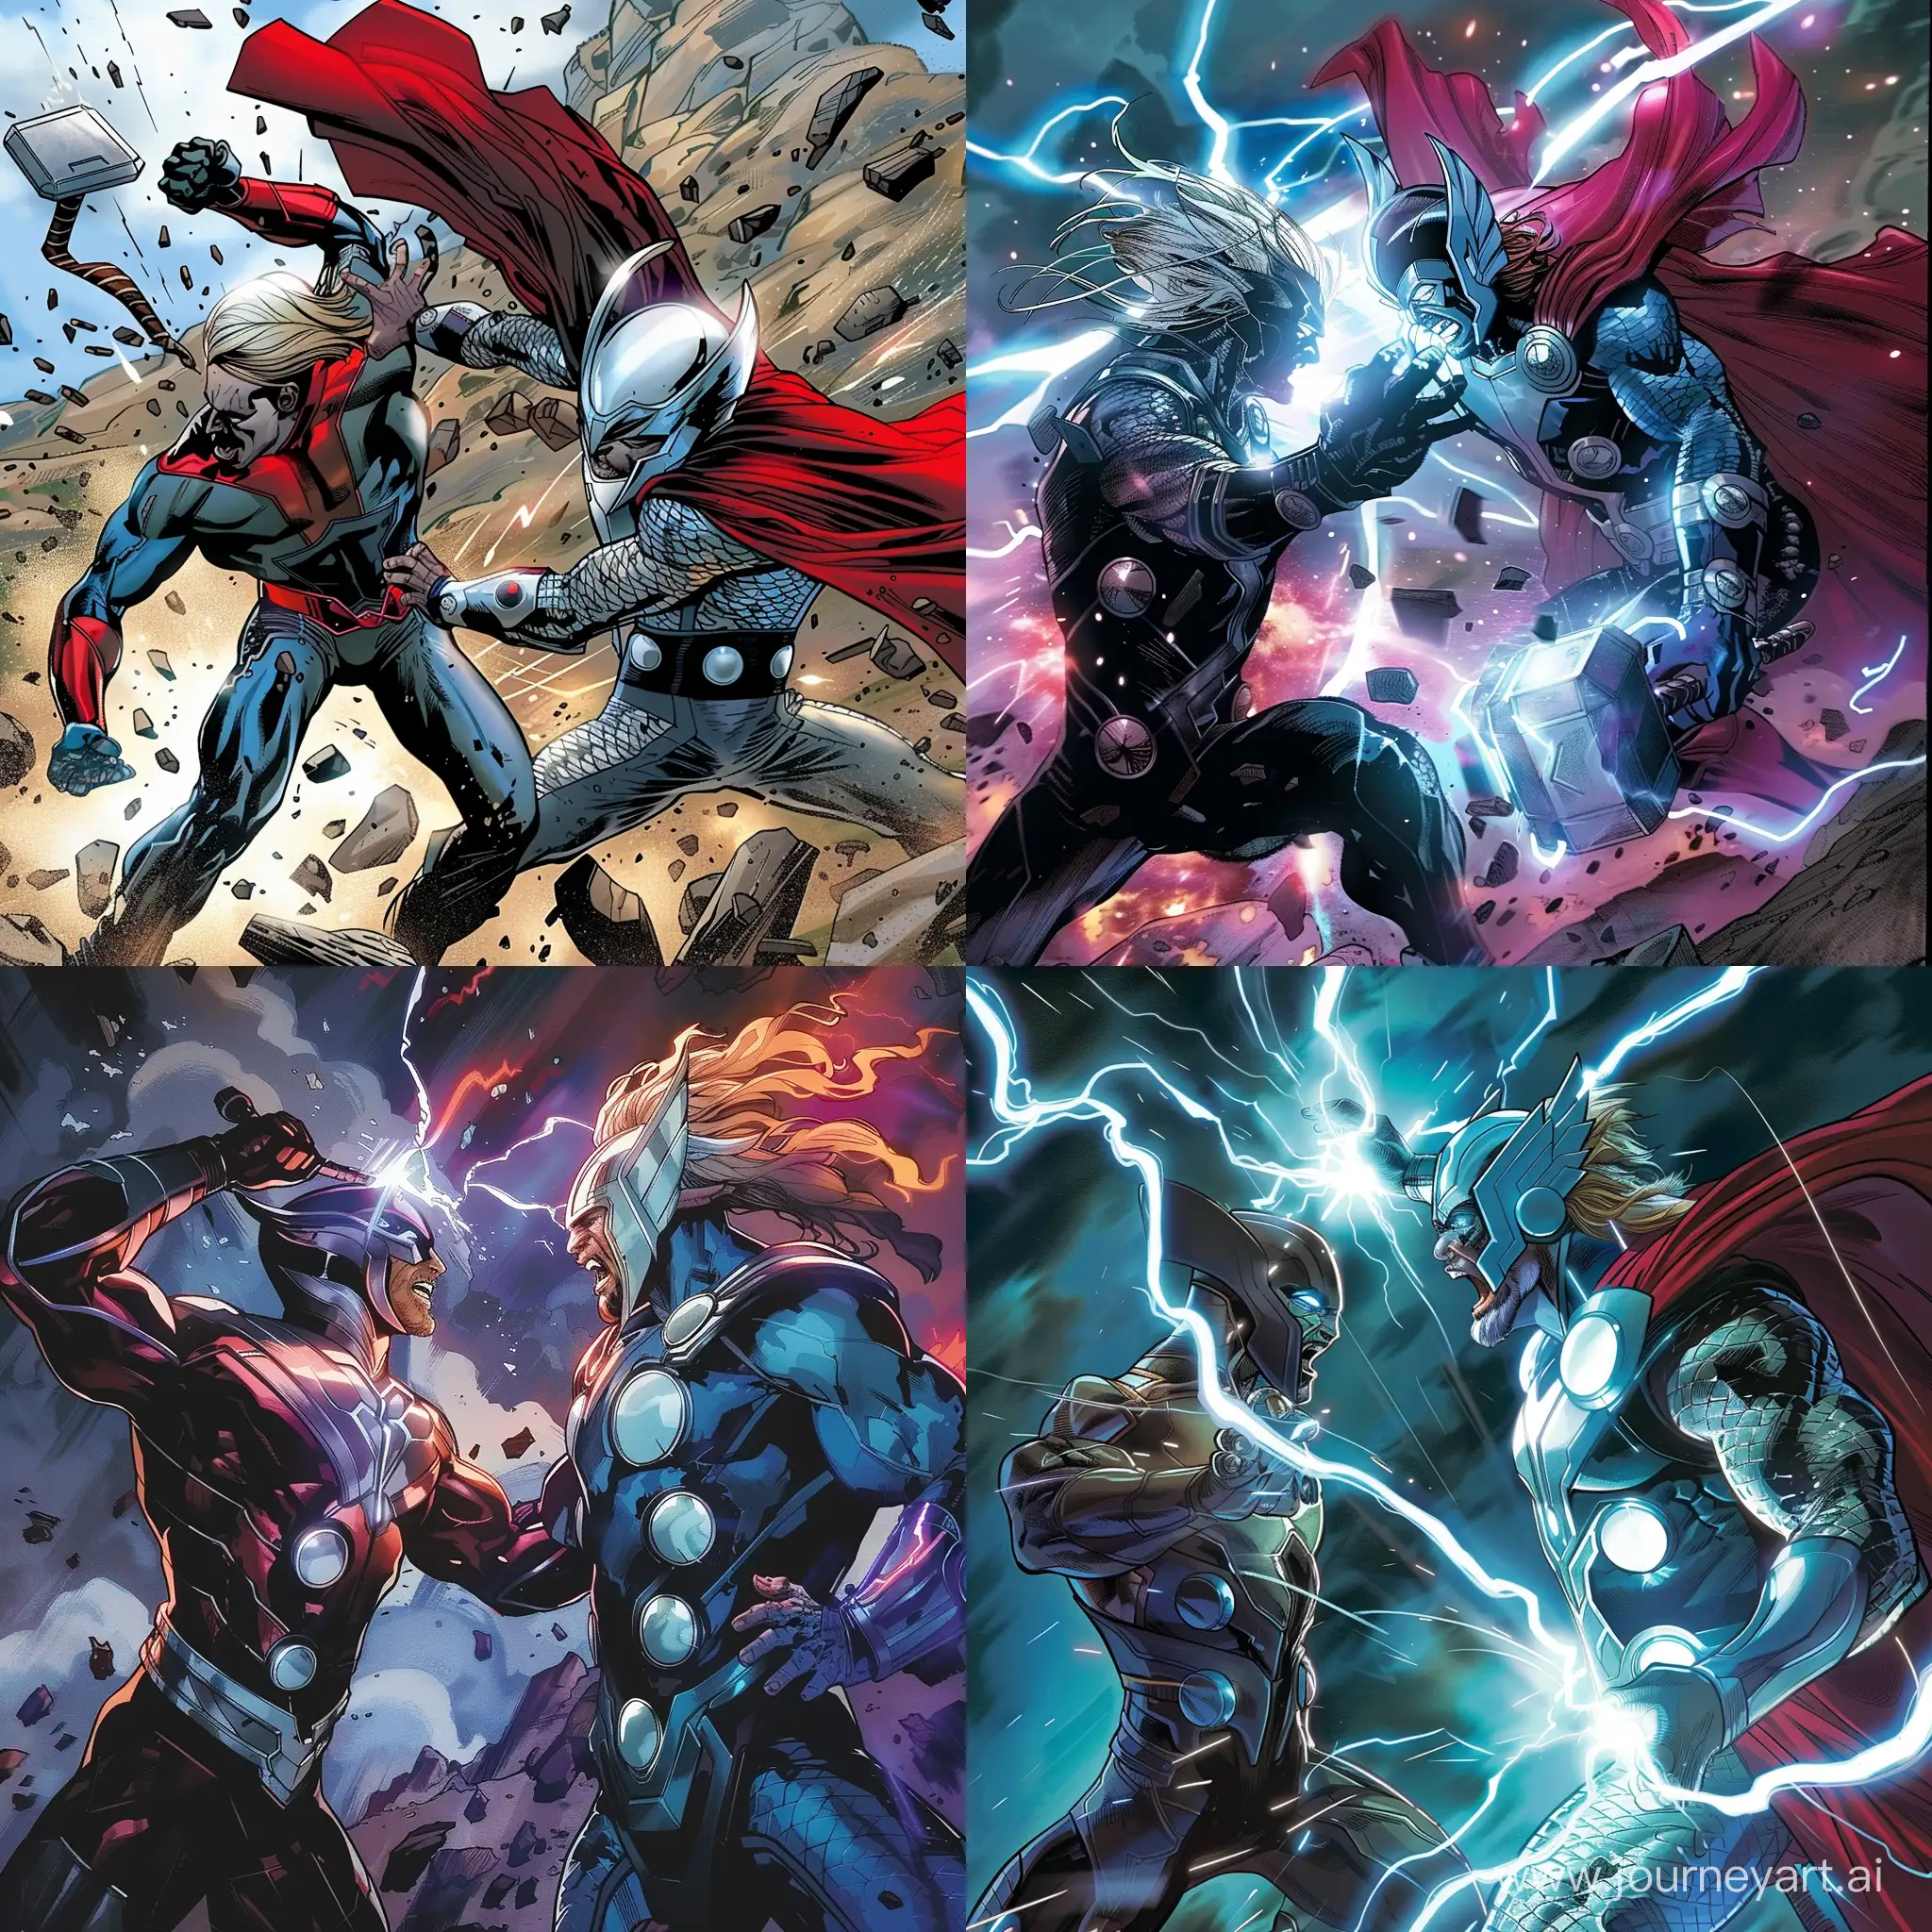 Genis-Vell fight with thor